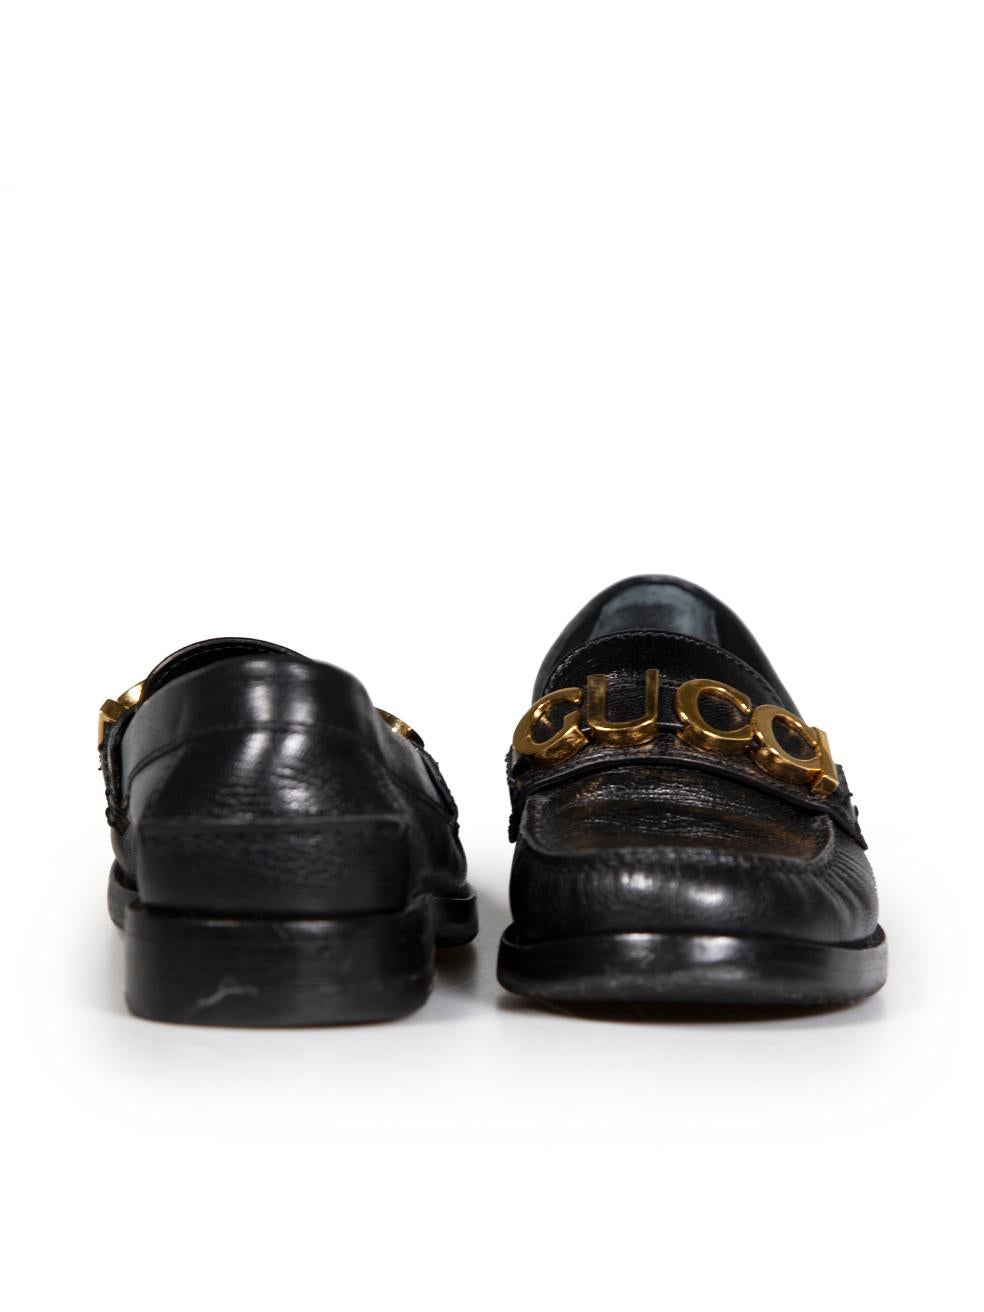 Gucci Black Leather Logo Loafers Size IT 35.5 In Good Condition For Sale In London, GB